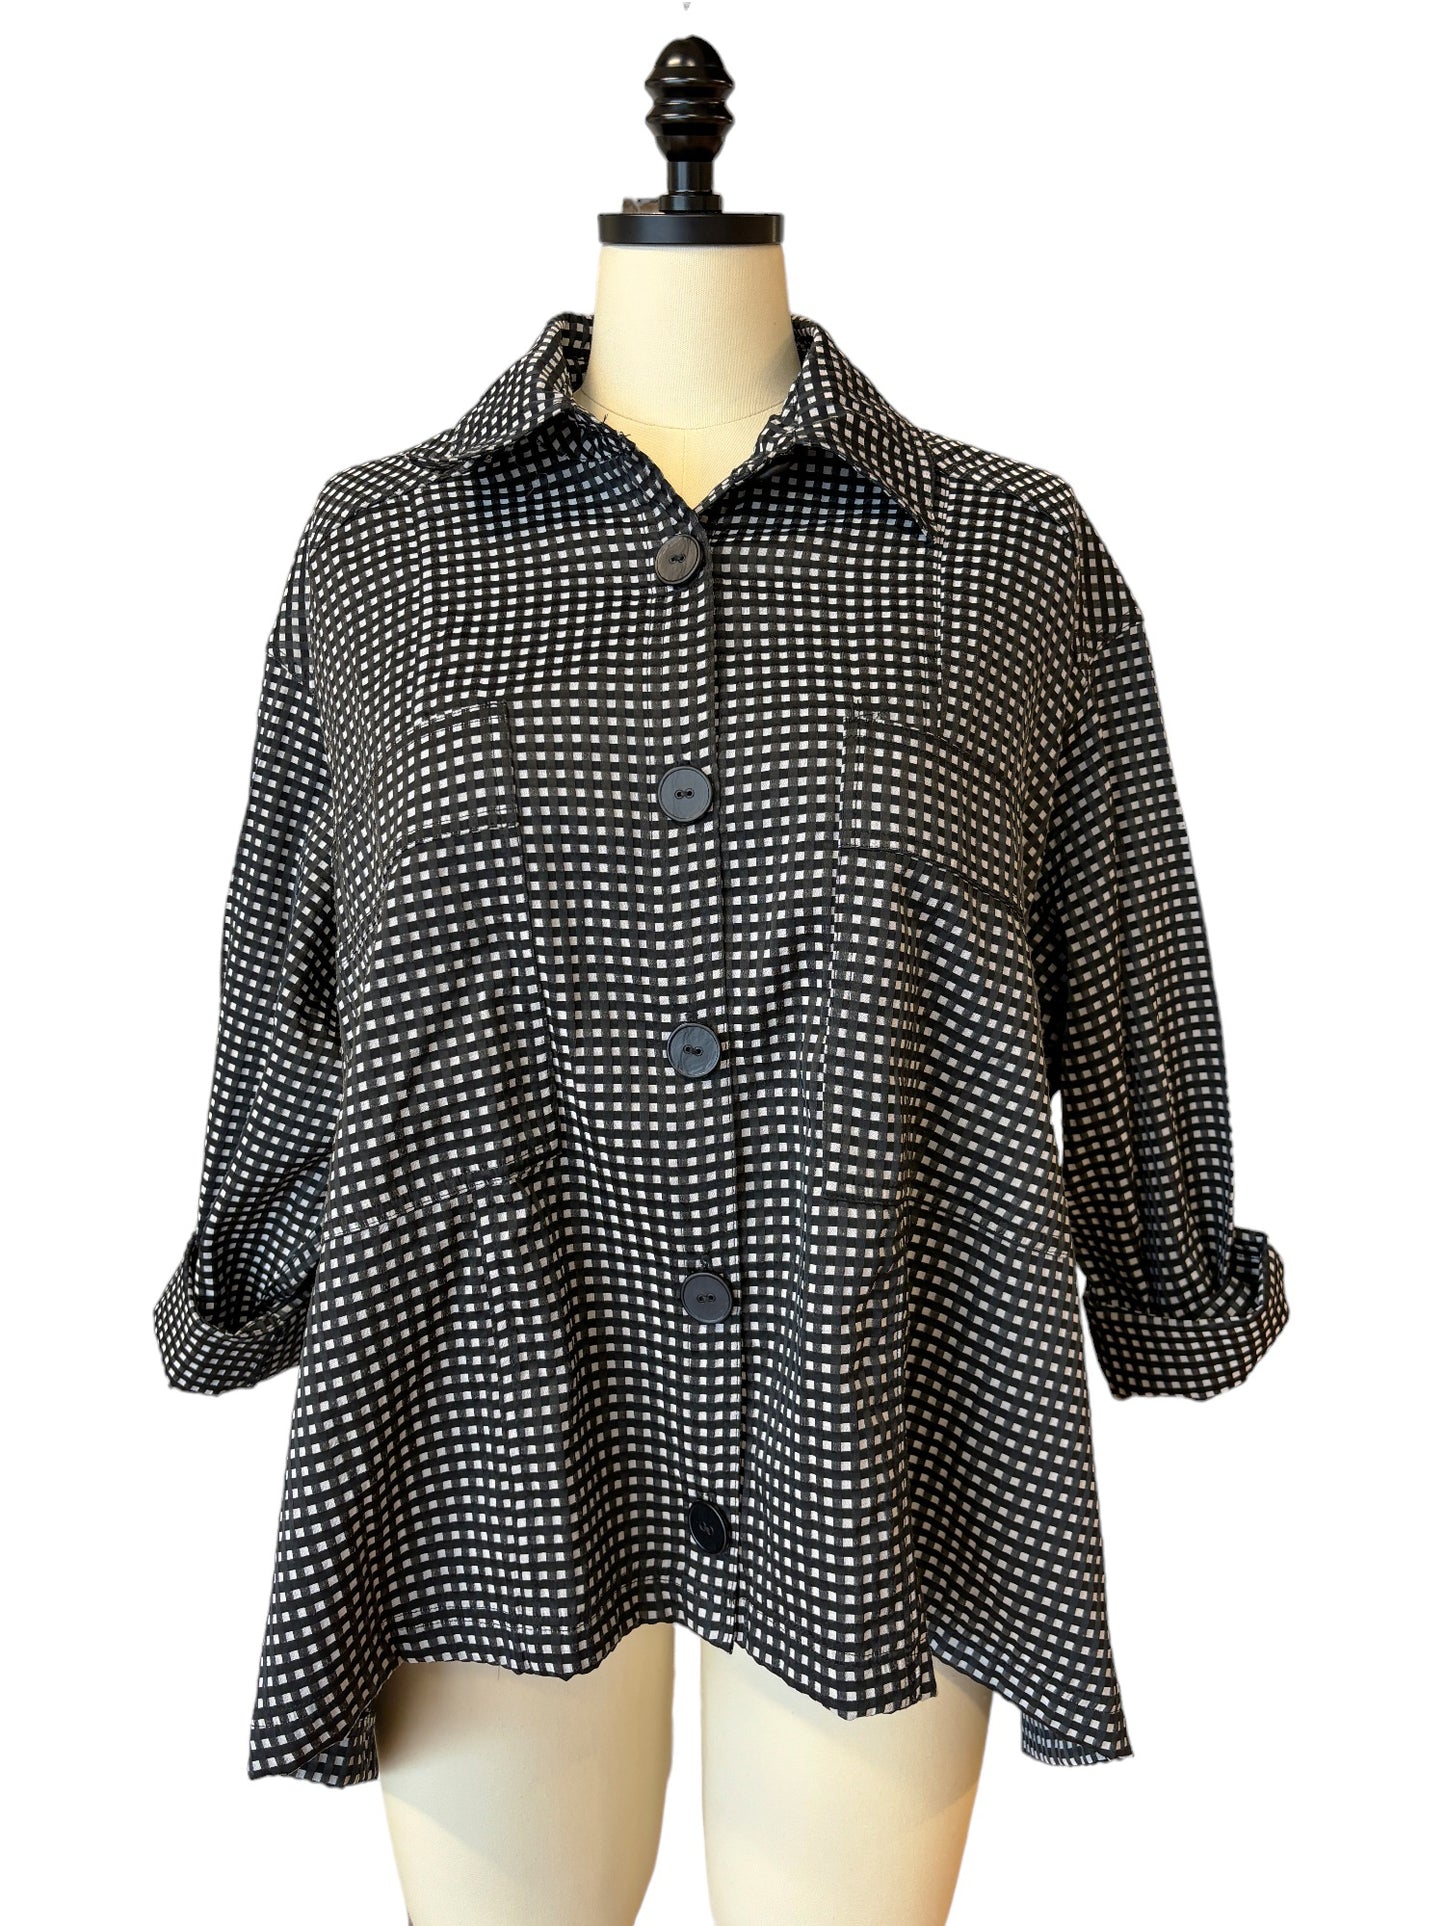 Two Pocket Jacket in Black Check